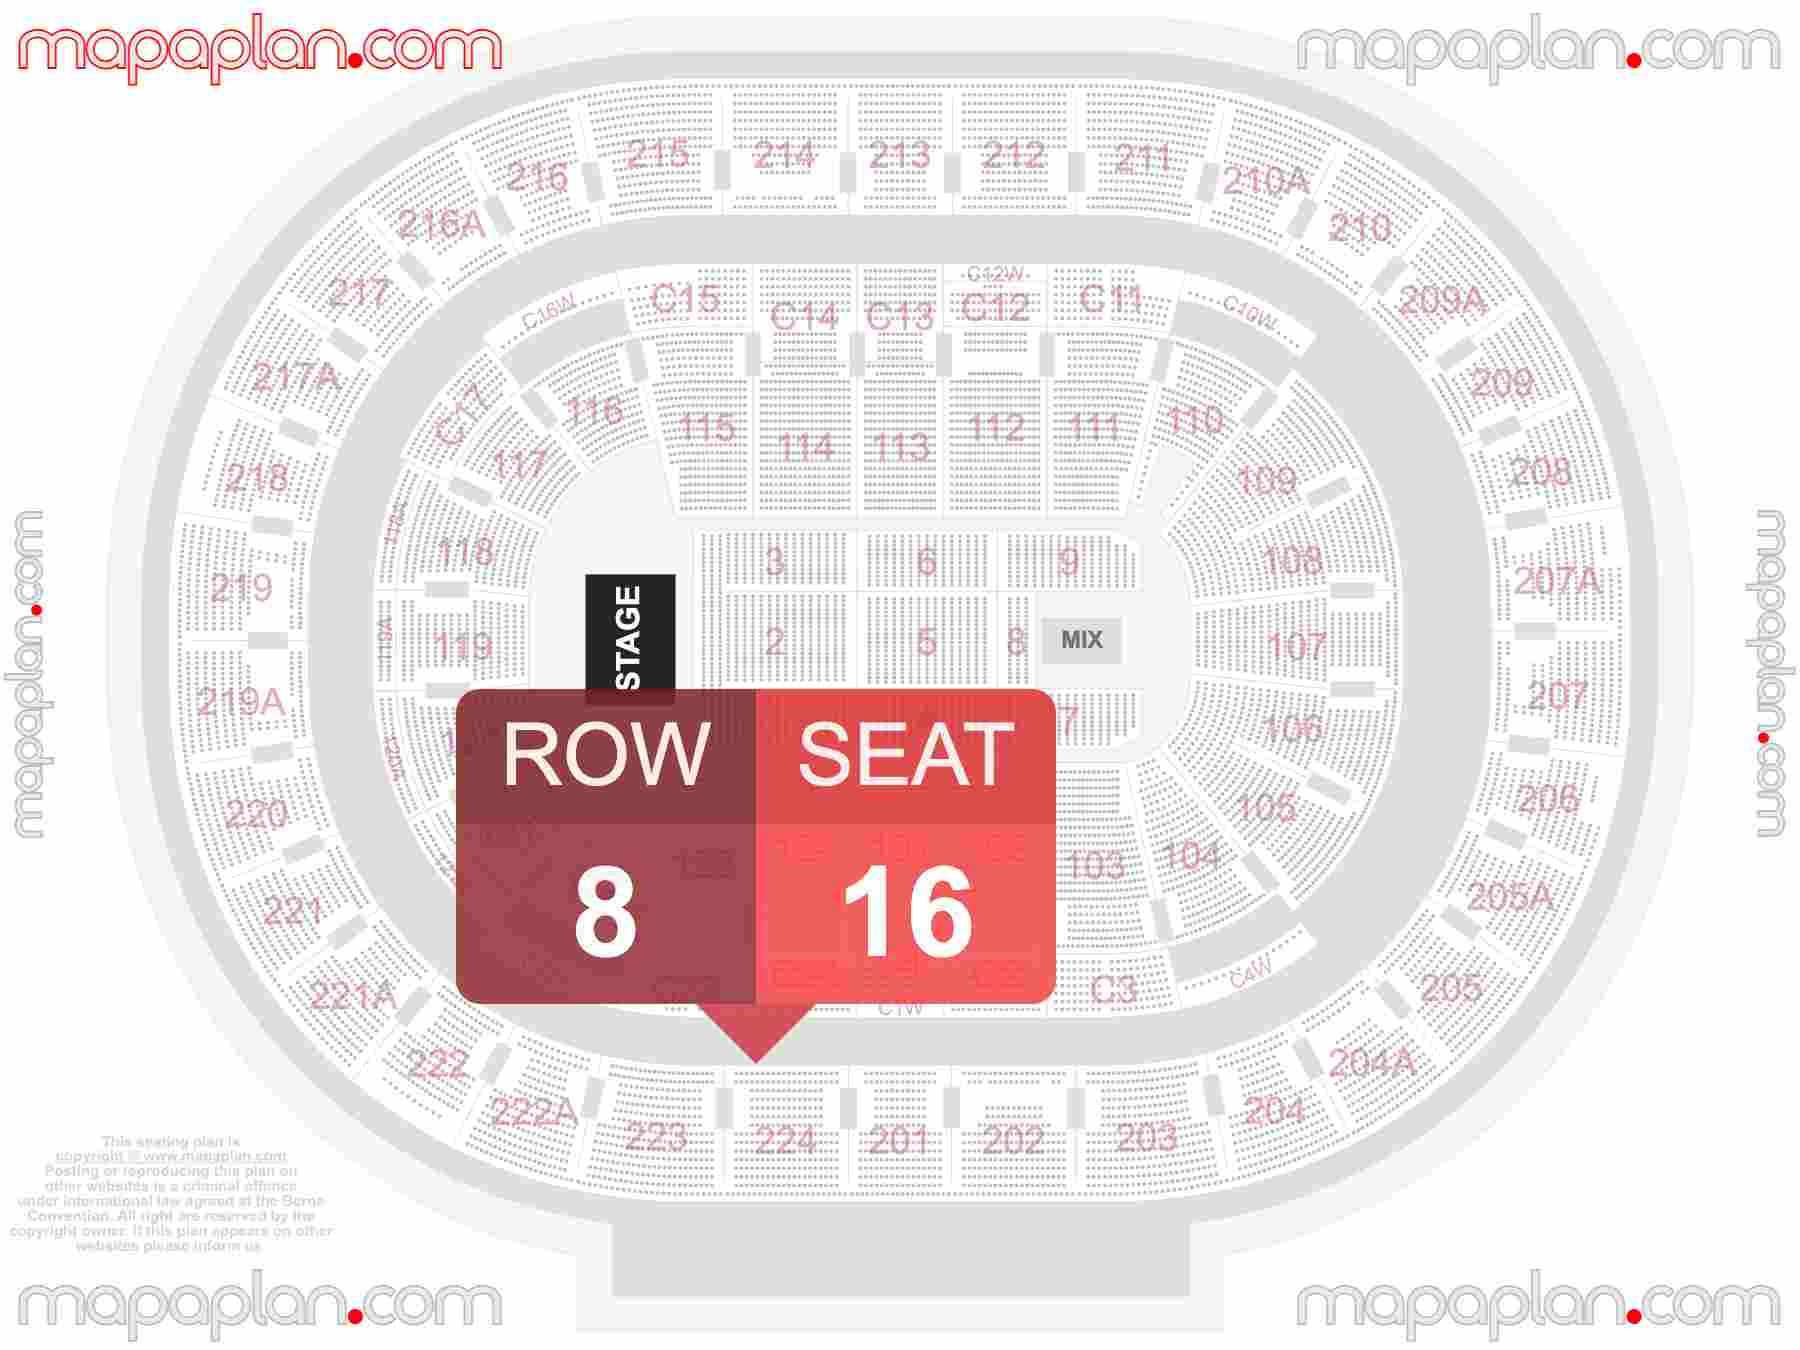 Philadelphia Wells Fargo Center seating chart Concert detailed seat numbers and row numbering chart with interactive map plan layout